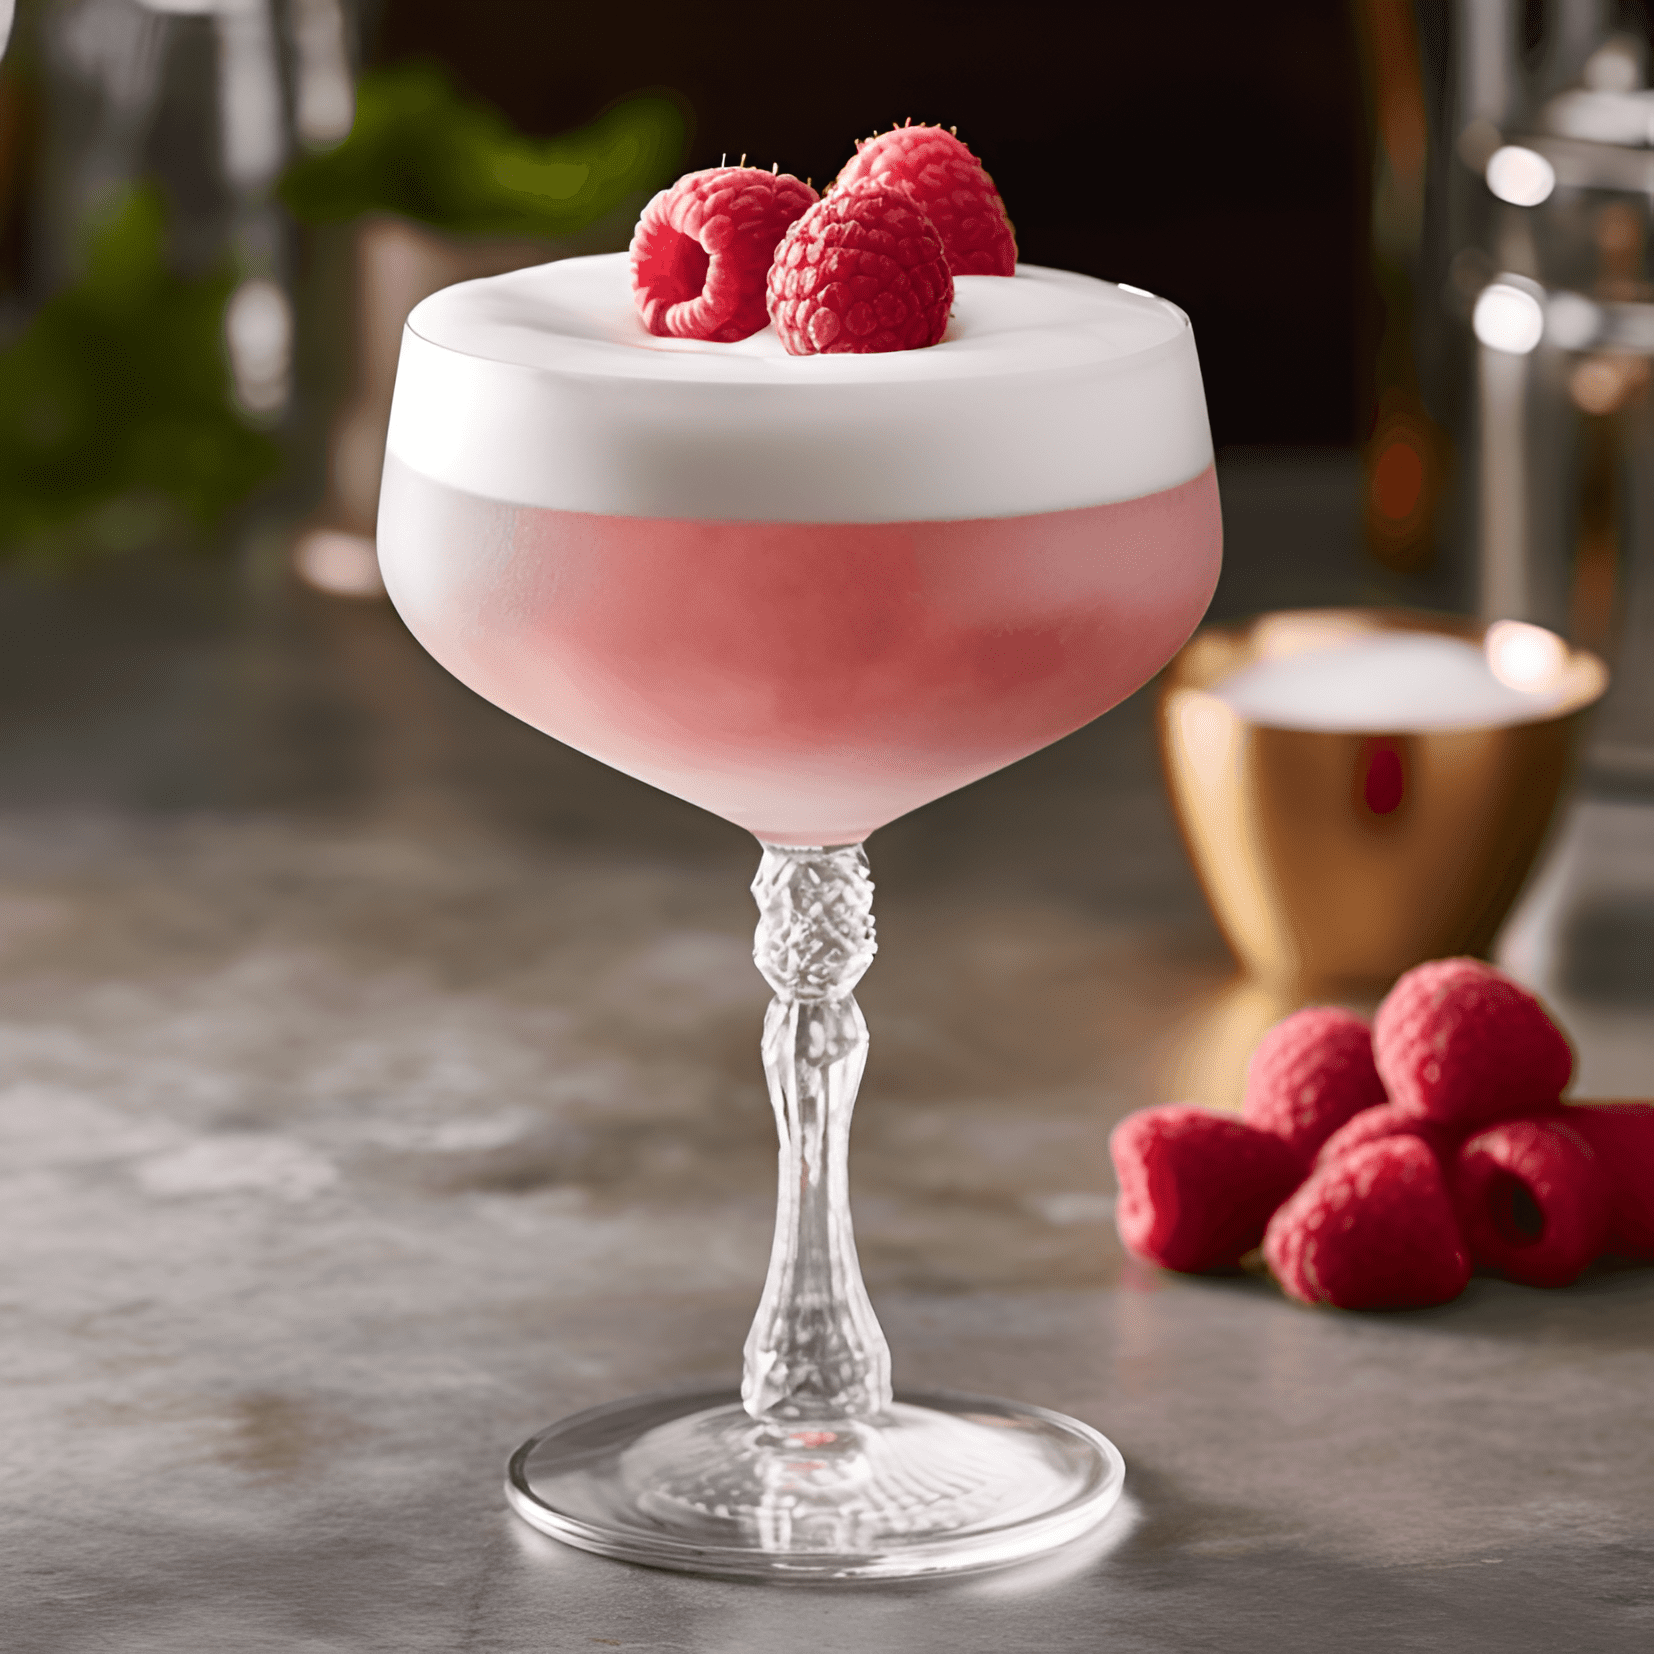 Bearded Lady Cocktail Recipe - The Bearded Lady cocktail is a delightful mix of sweet, sour, and fruity flavors. The combination of gin, elderflower liqueur, and lemon juice creates a refreshing and zesty base, while the raspberry syrup adds a touch of sweetness. The egg white gives the drink a smooth and creamy texture, making it a well-rounded and satisfying cocktail.